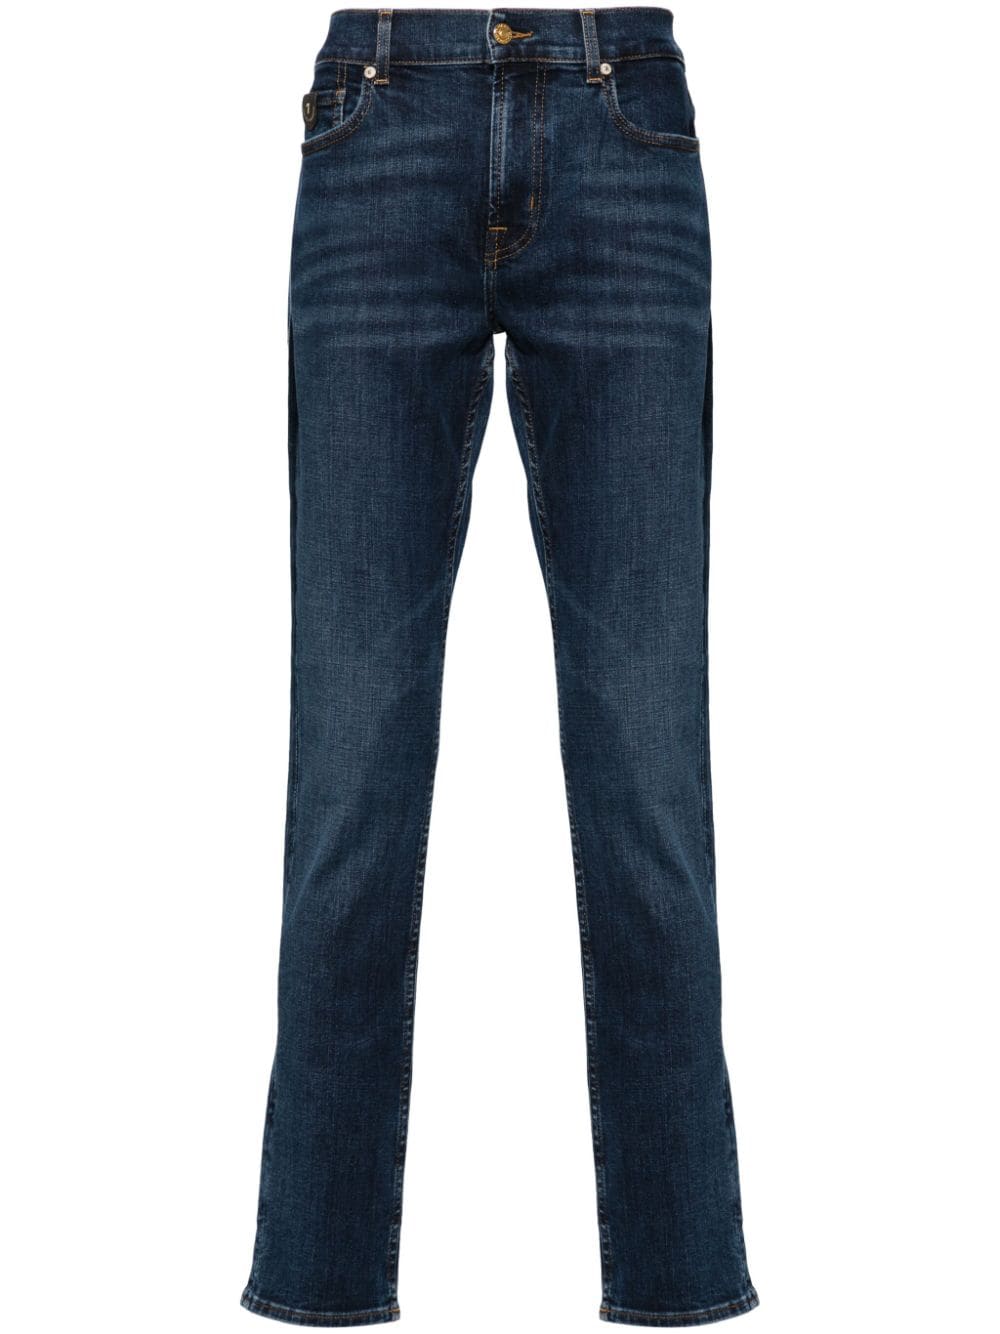 7 For All Mankind Halbhohe Paxtyn Skinny-Jeans - Blau von 7 For All Mankind